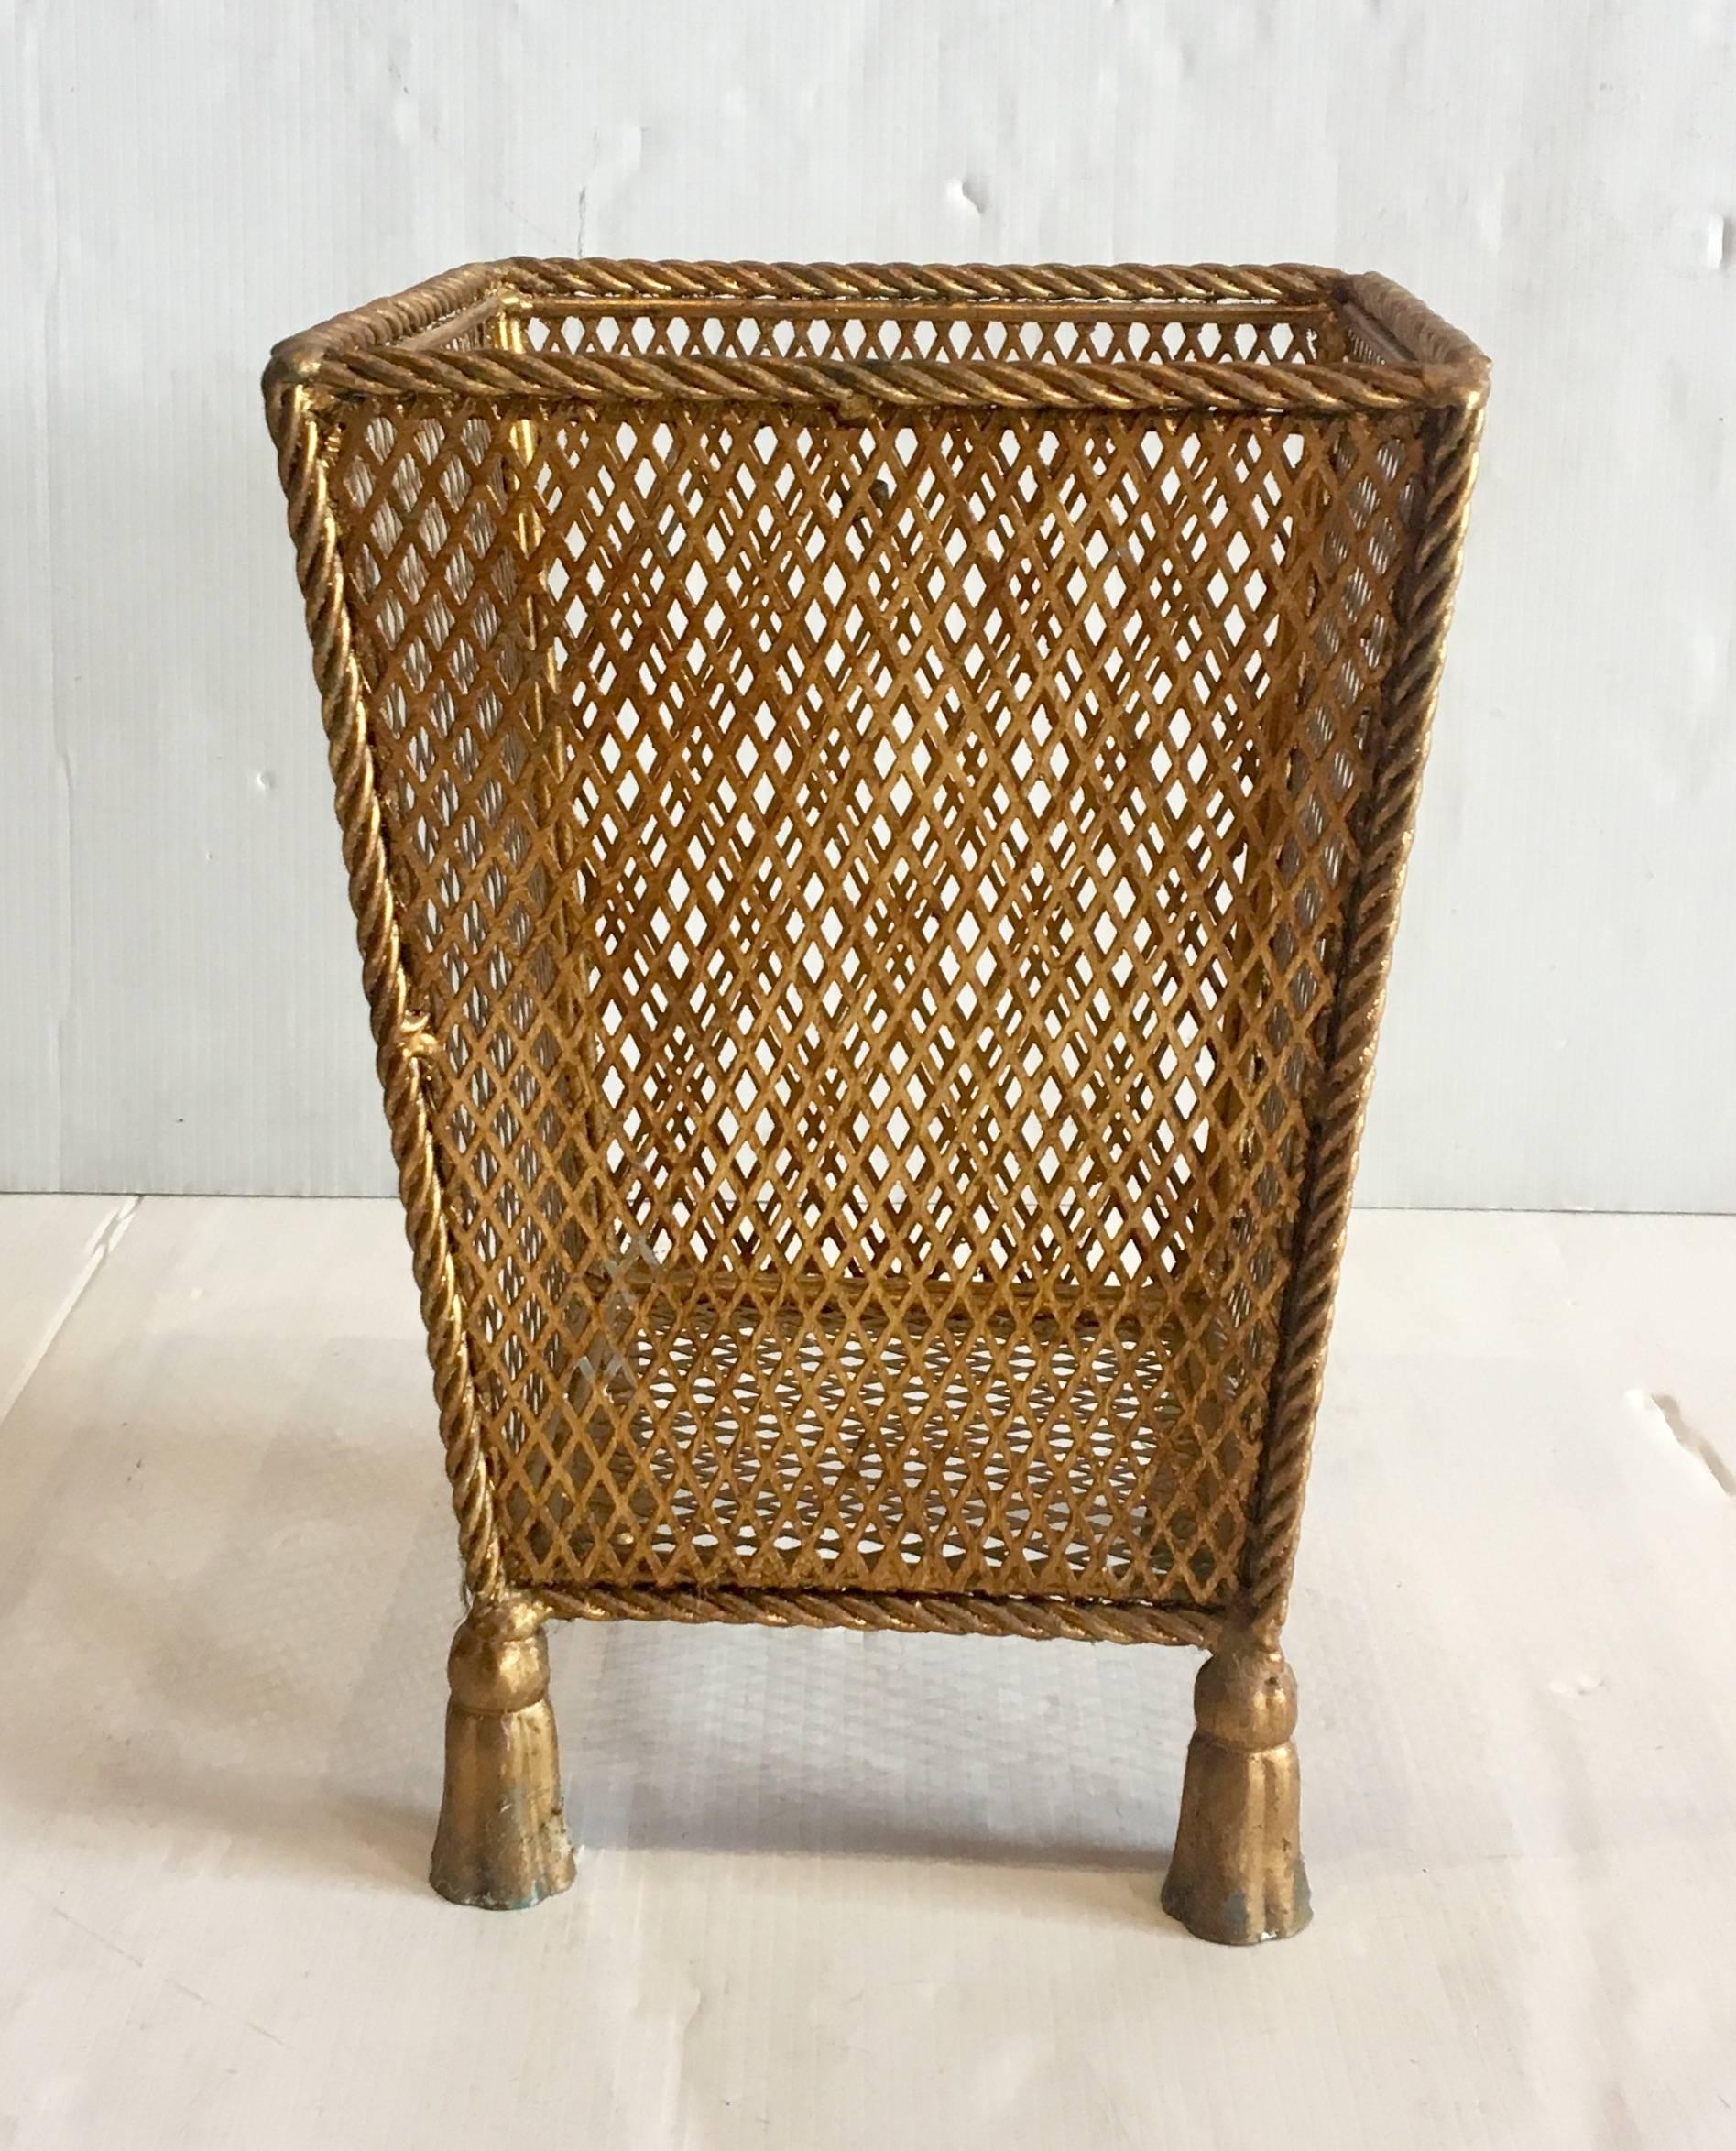 Elegant and unique waste basket in gold Guild finish metal, circa 1950s, very nice condition never used retains its made in Italy, tag.